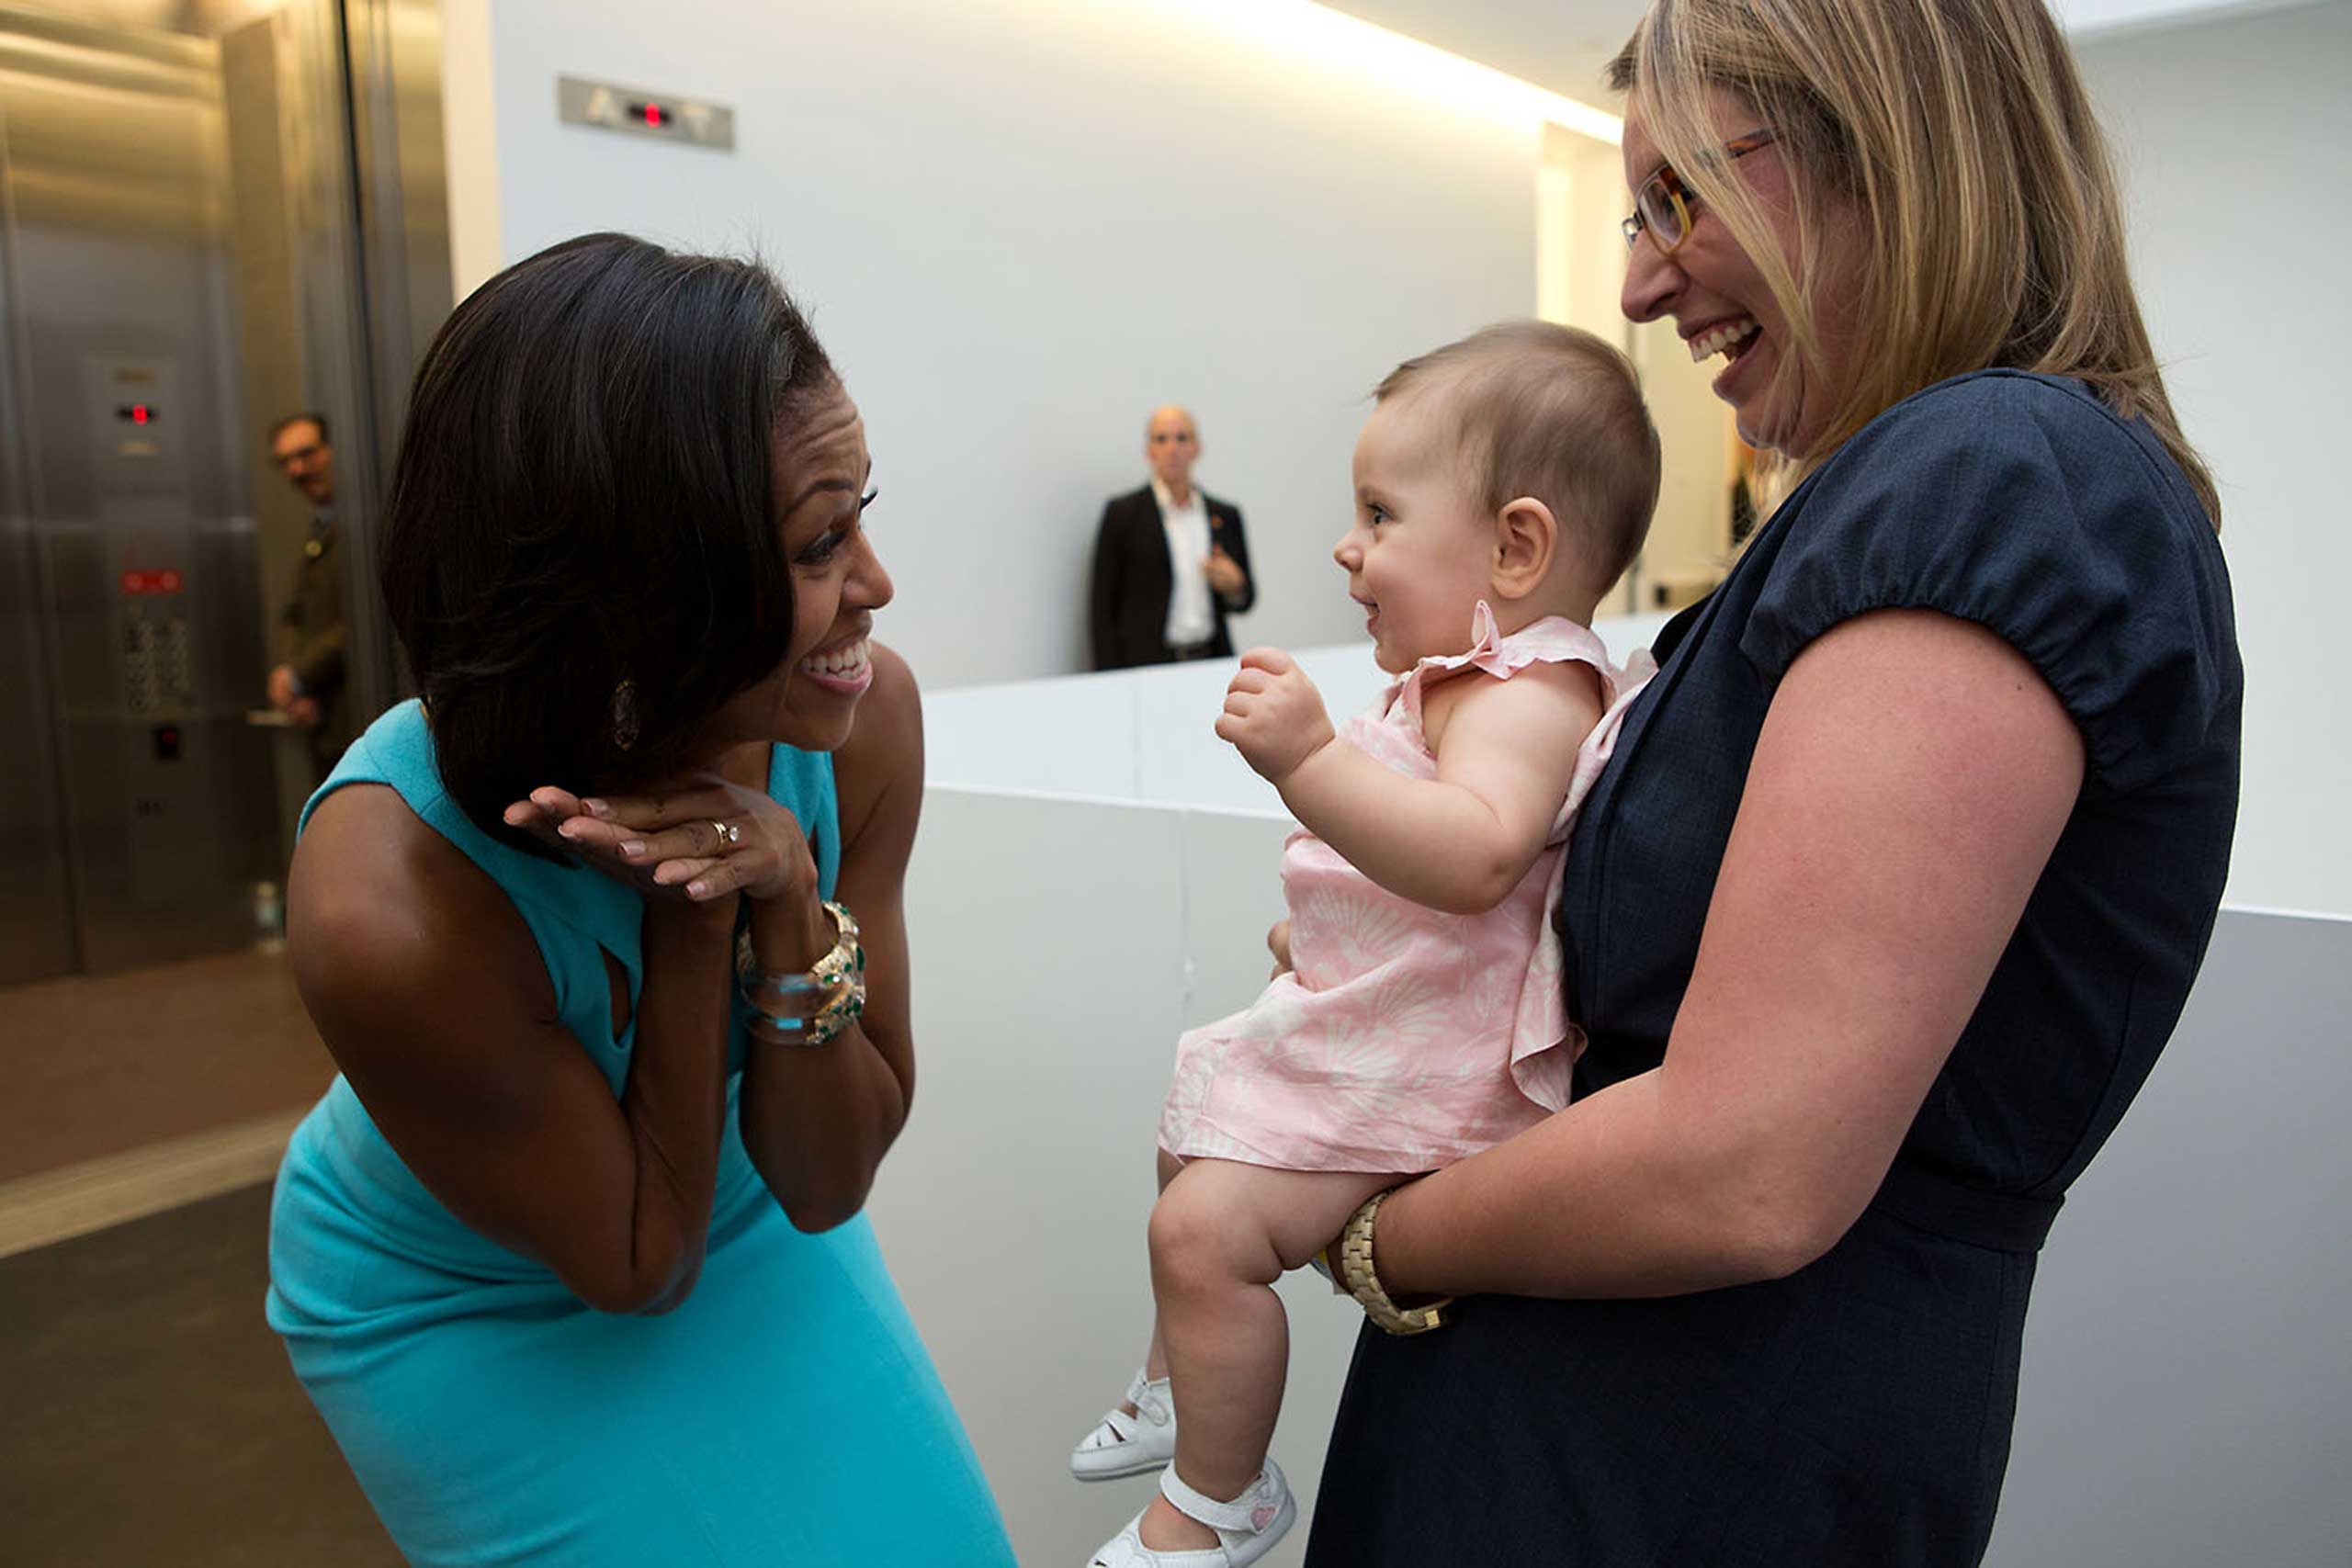 First Lady Michelle Obama greets former White House staffer Franny Starkey and her daughter Willa prior to an event at the Museum of Contemporary Art Denver in Denver, Colo., Aug. 11, 2012.